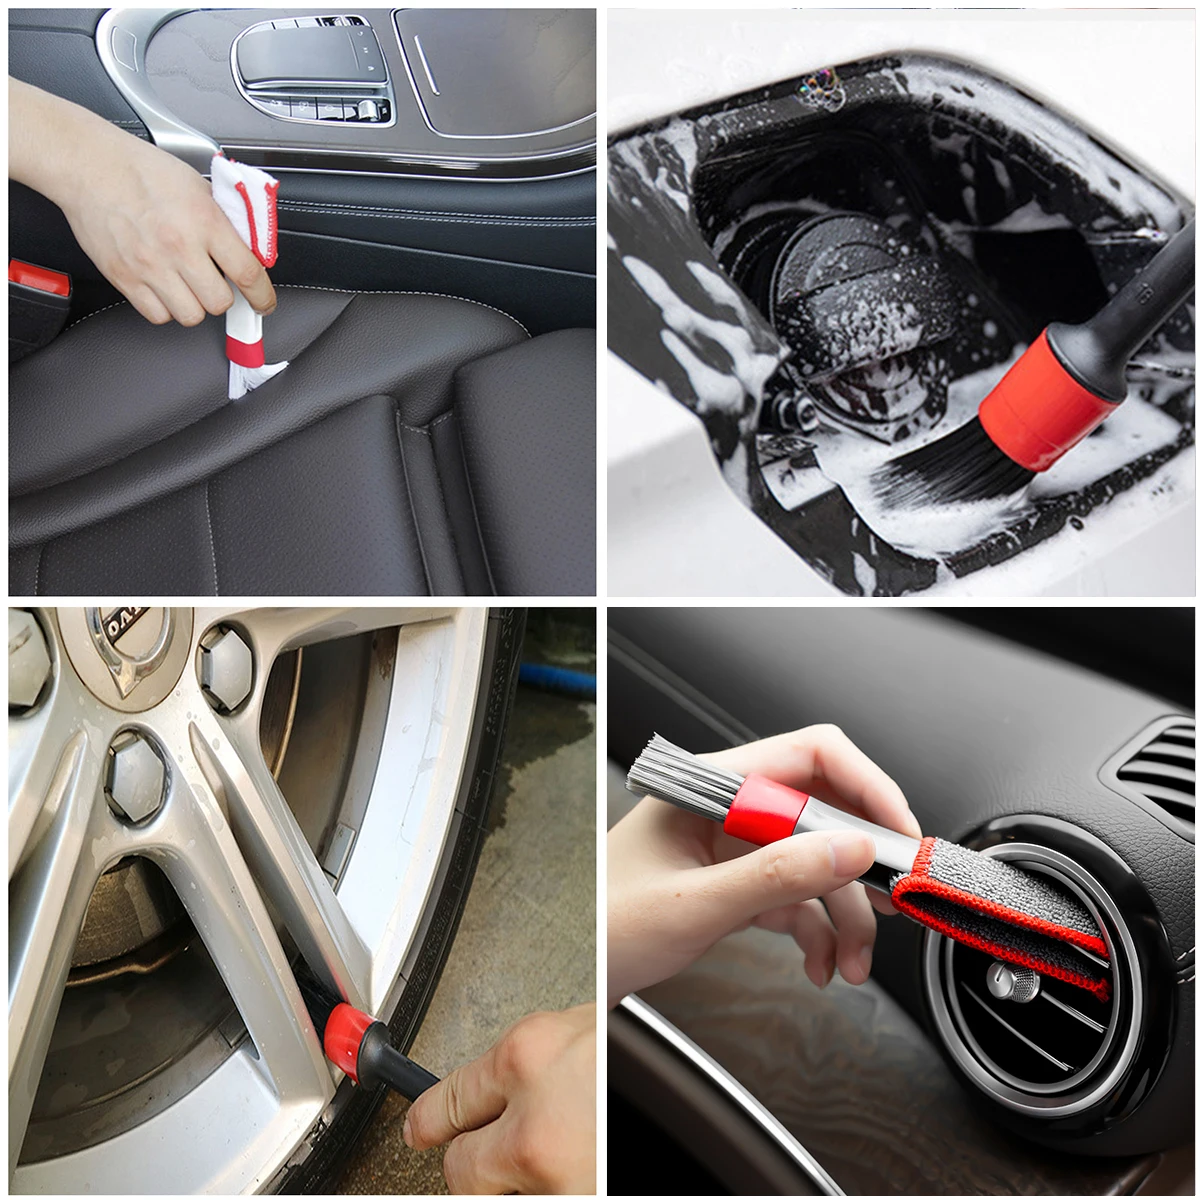 5x Auto Car Detailing Brush Set Car Interior Cleaning Kit Automotive Detail  Brushes Fit for Cleaning Interior Cup Holder Trim - AliExpress